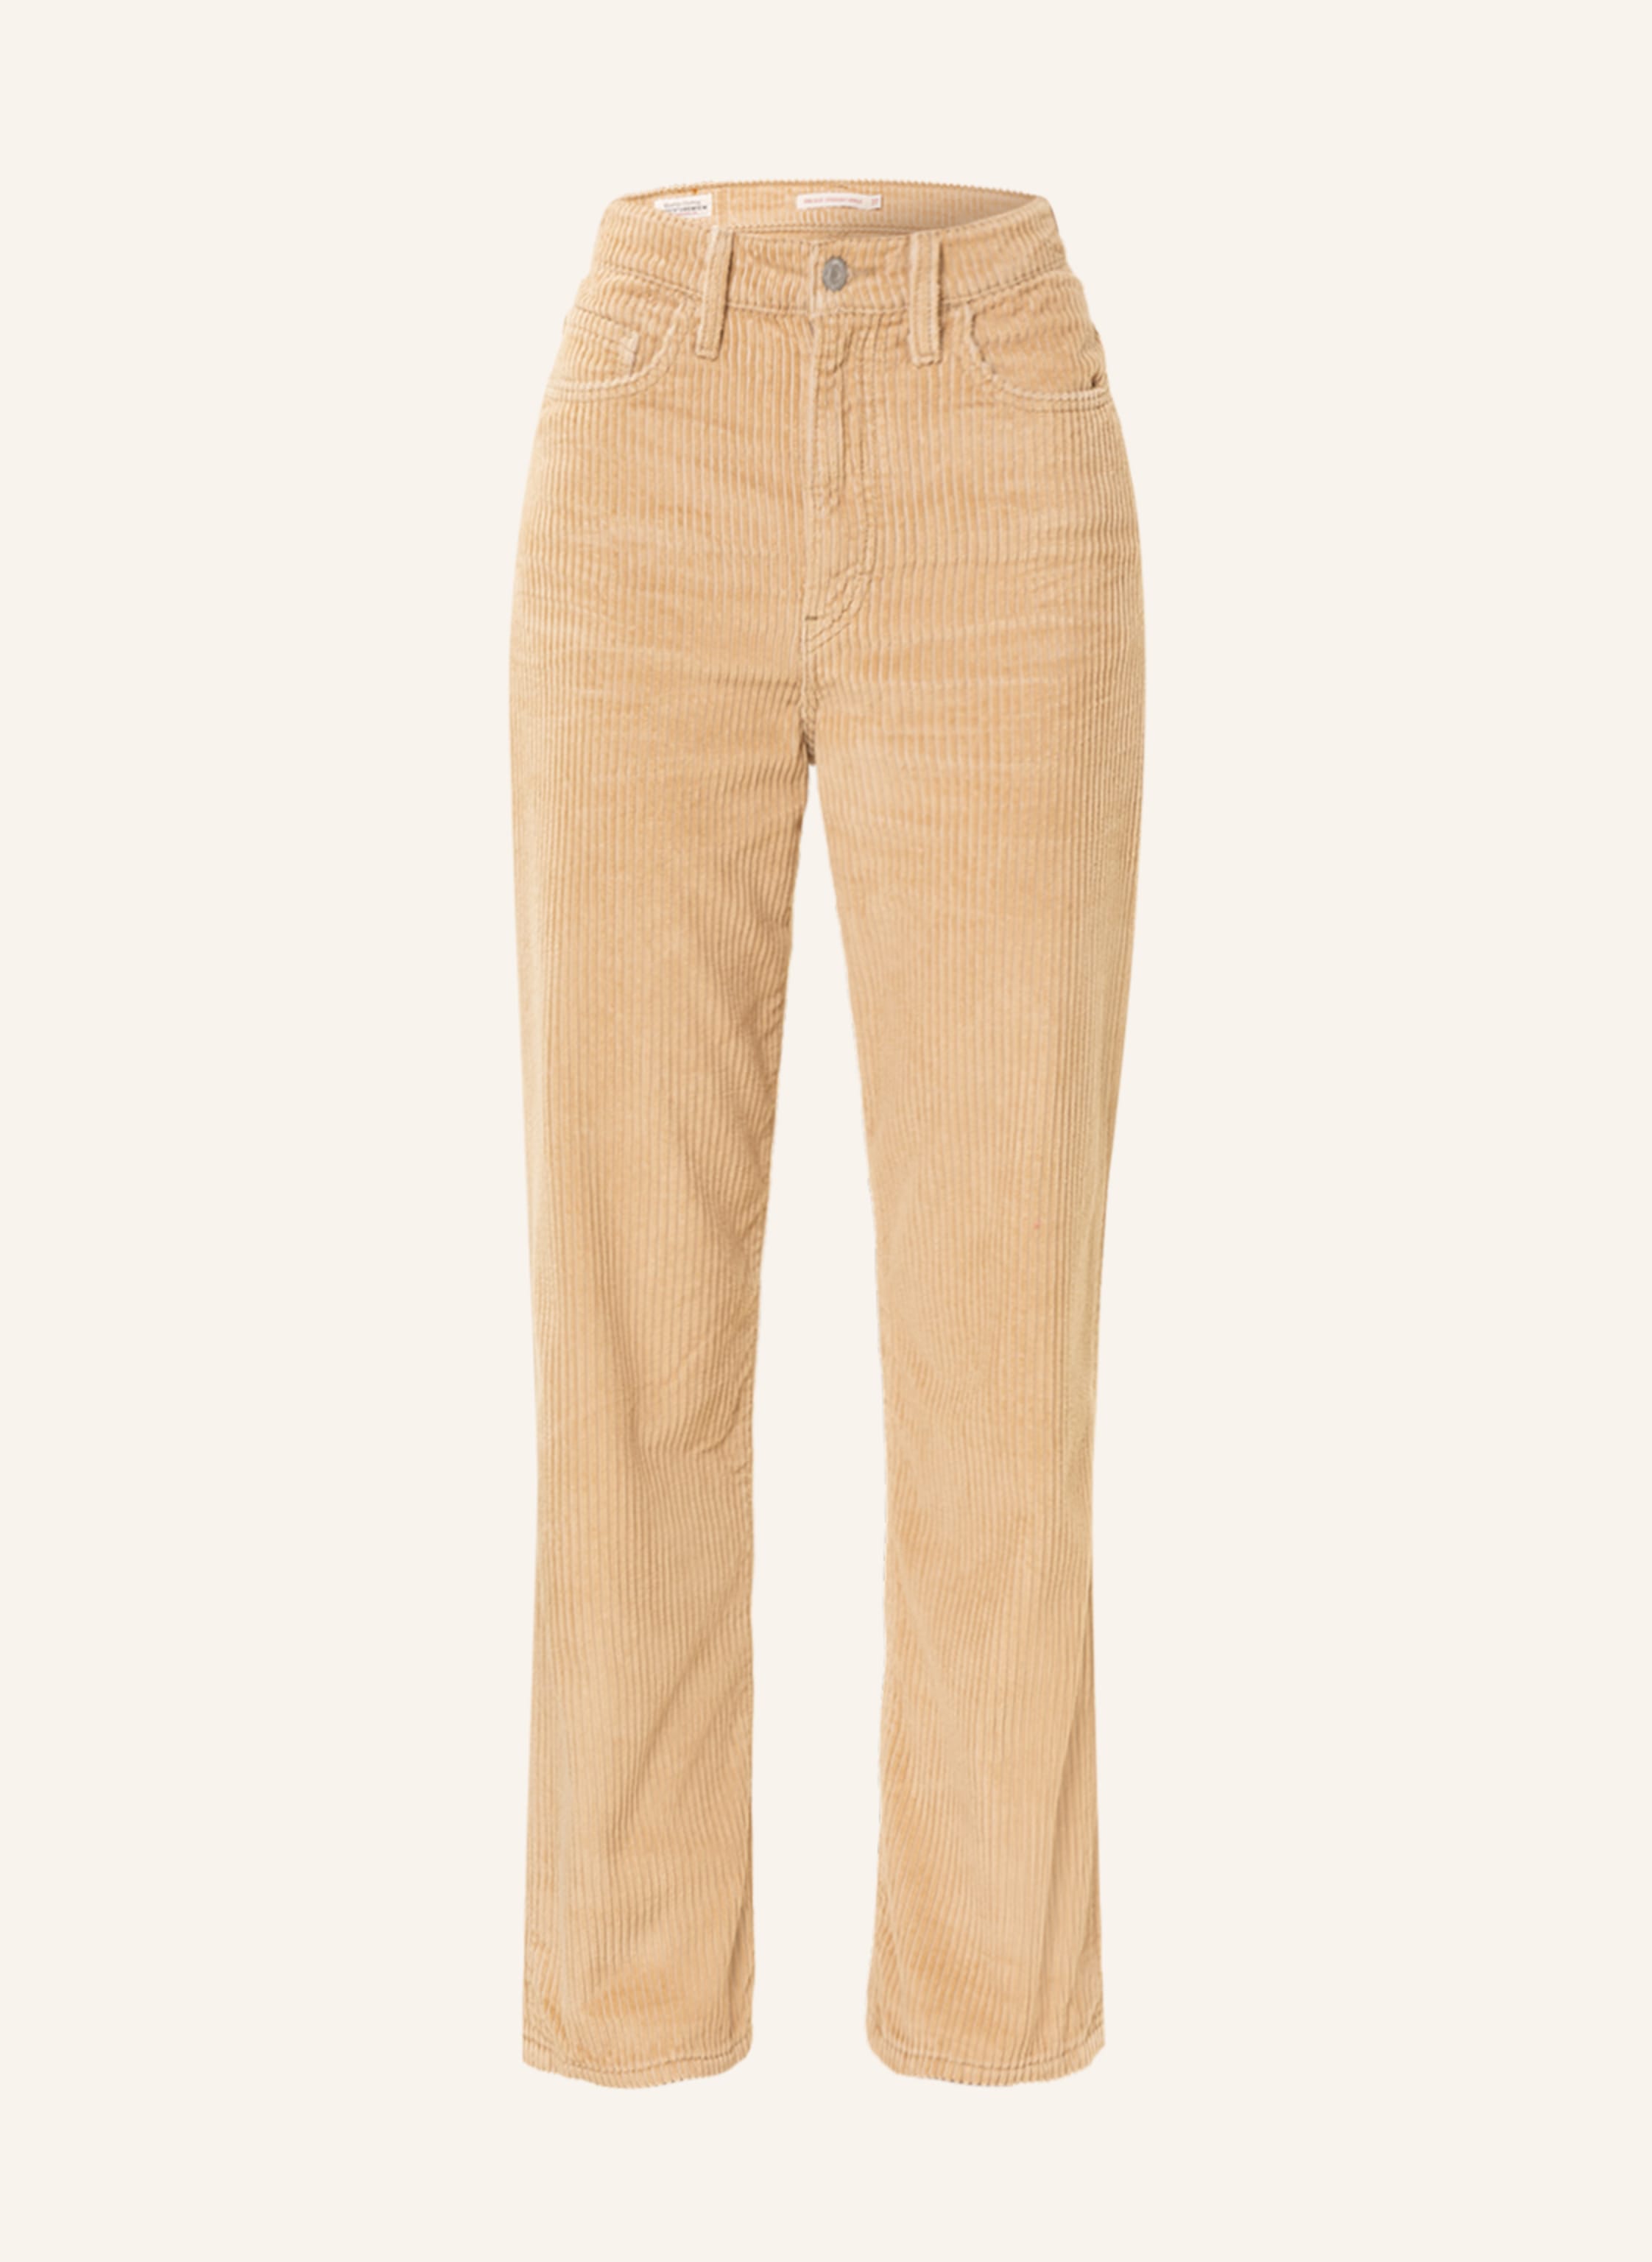 Levis Ribcage Corduroy WideLeg Pant  29 Pieces Our Editors Are Shopping  That Have Nostalgia Written All Over Them  POPSUGAR Fashion Photo 4